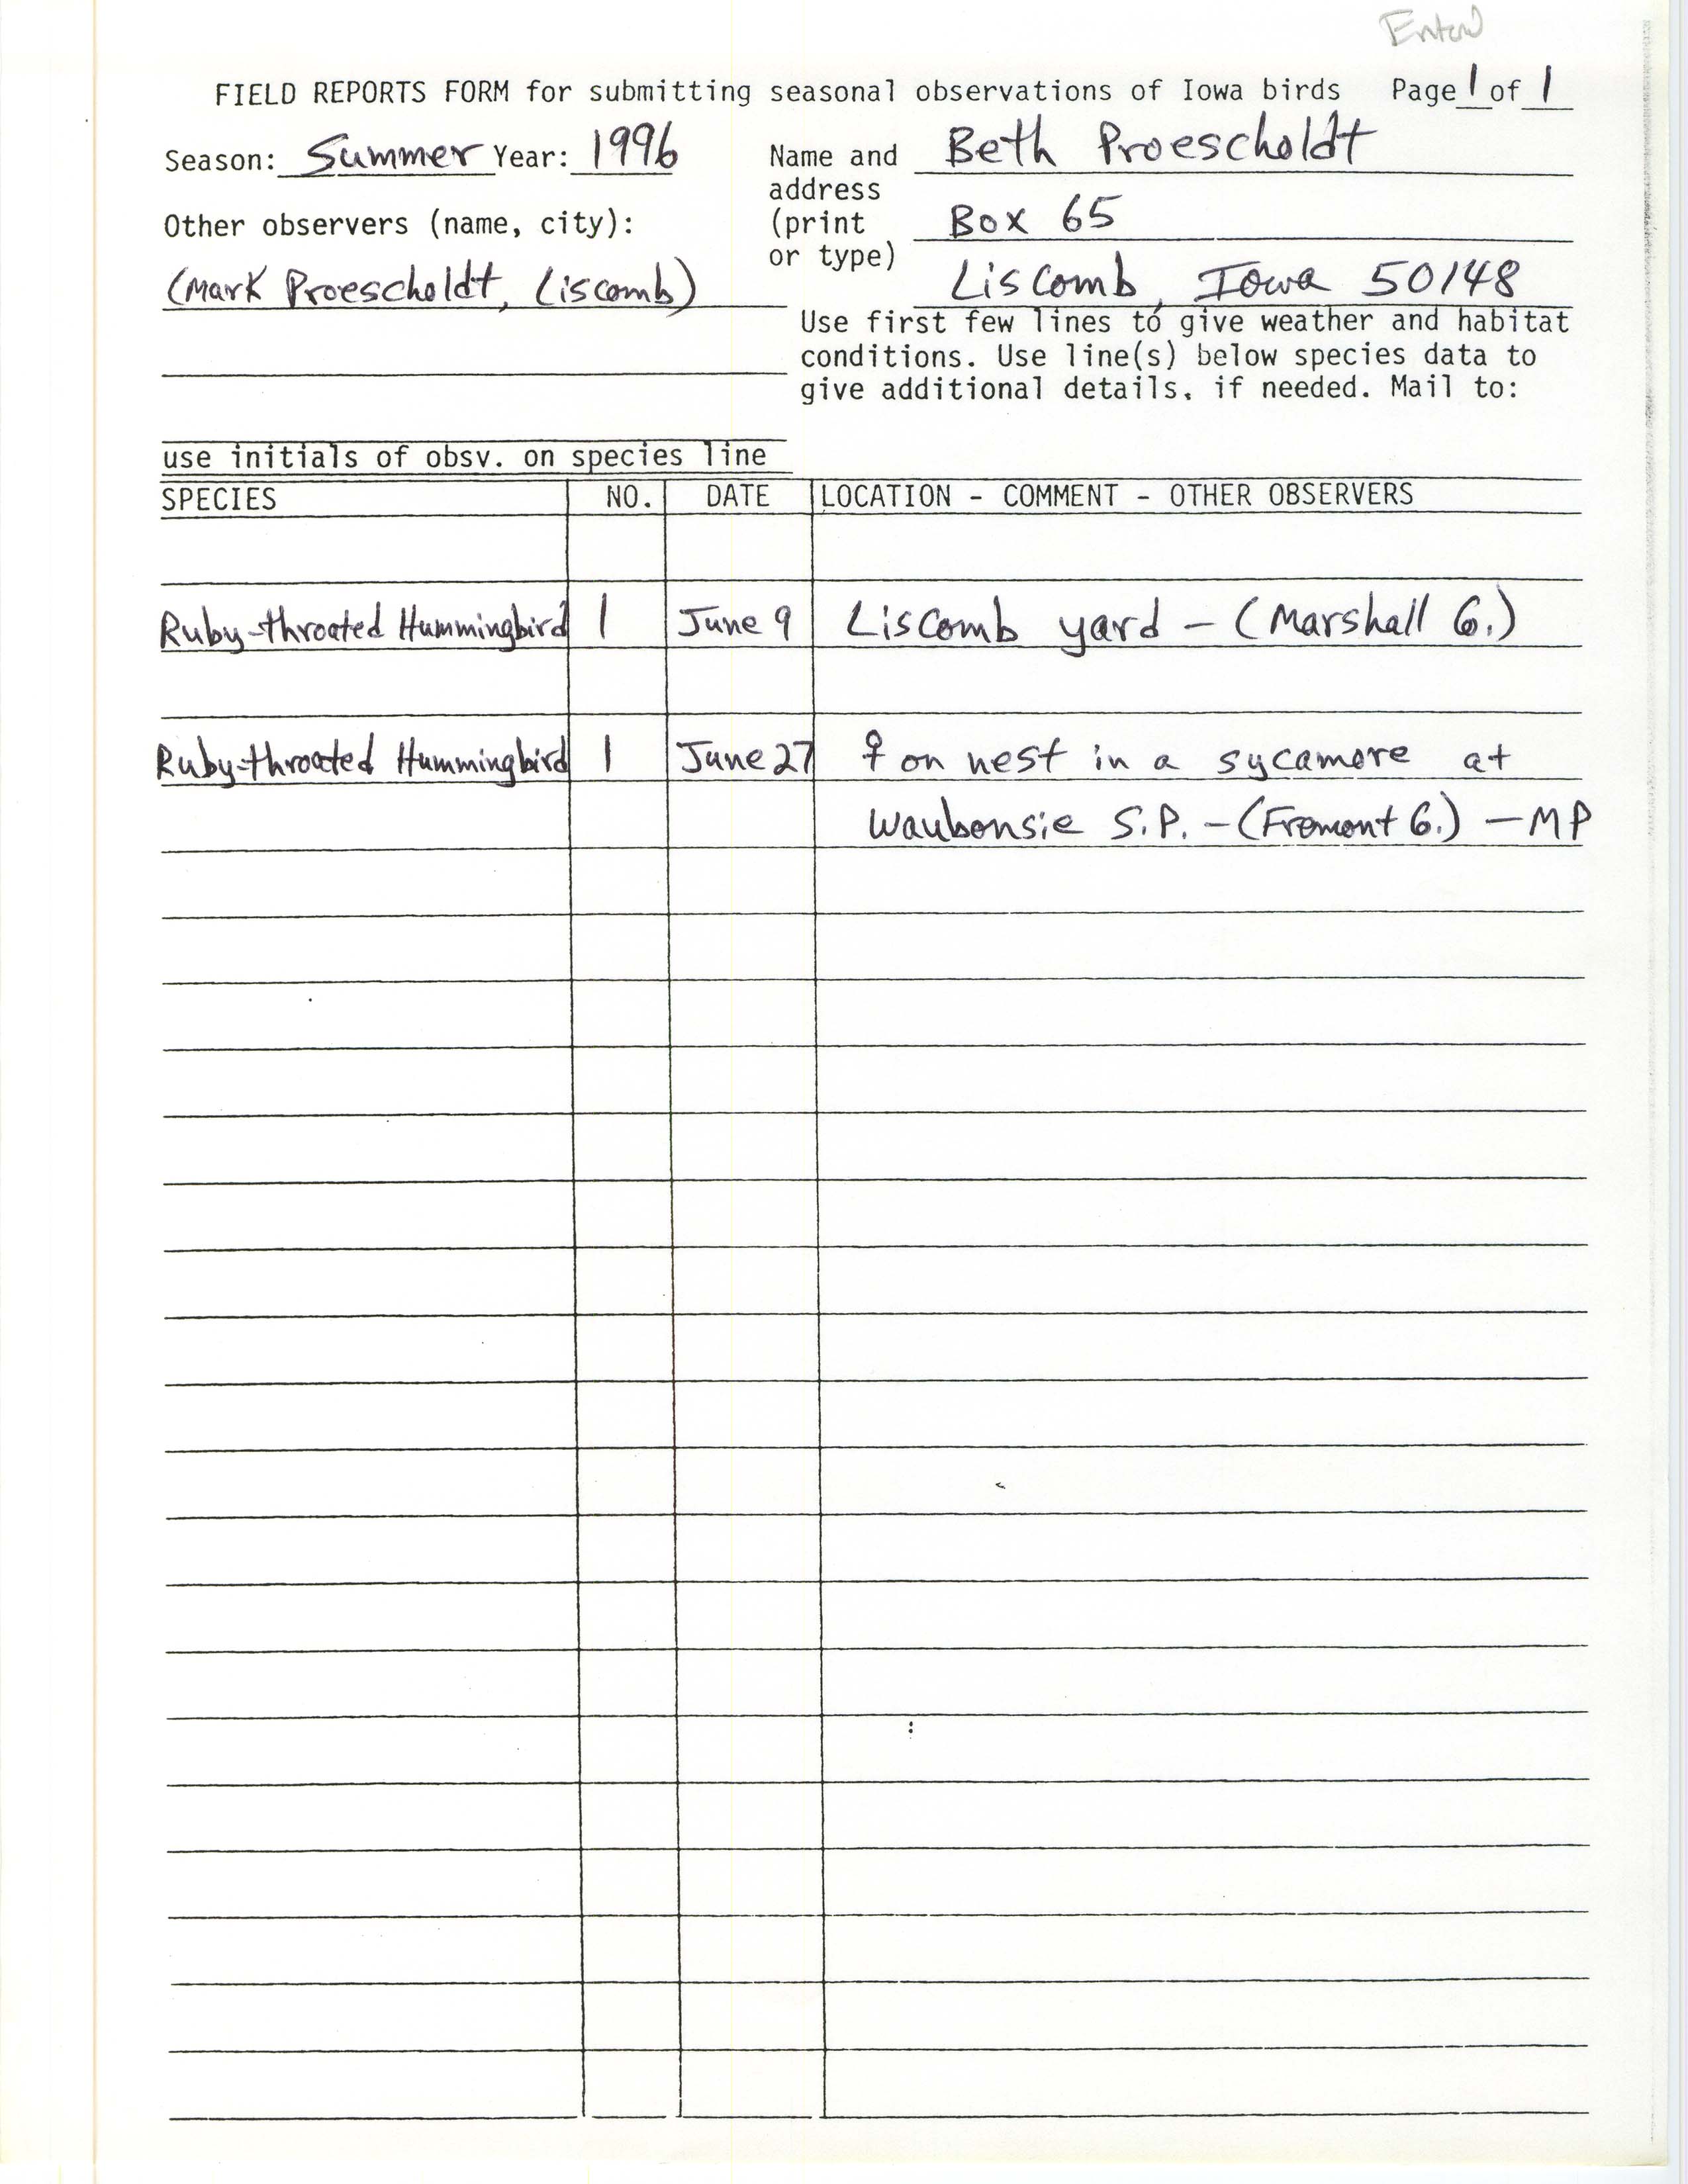 Field reports form for submitting seasonal observations of Iowa birds, Beth Proescholdt, summer 1996